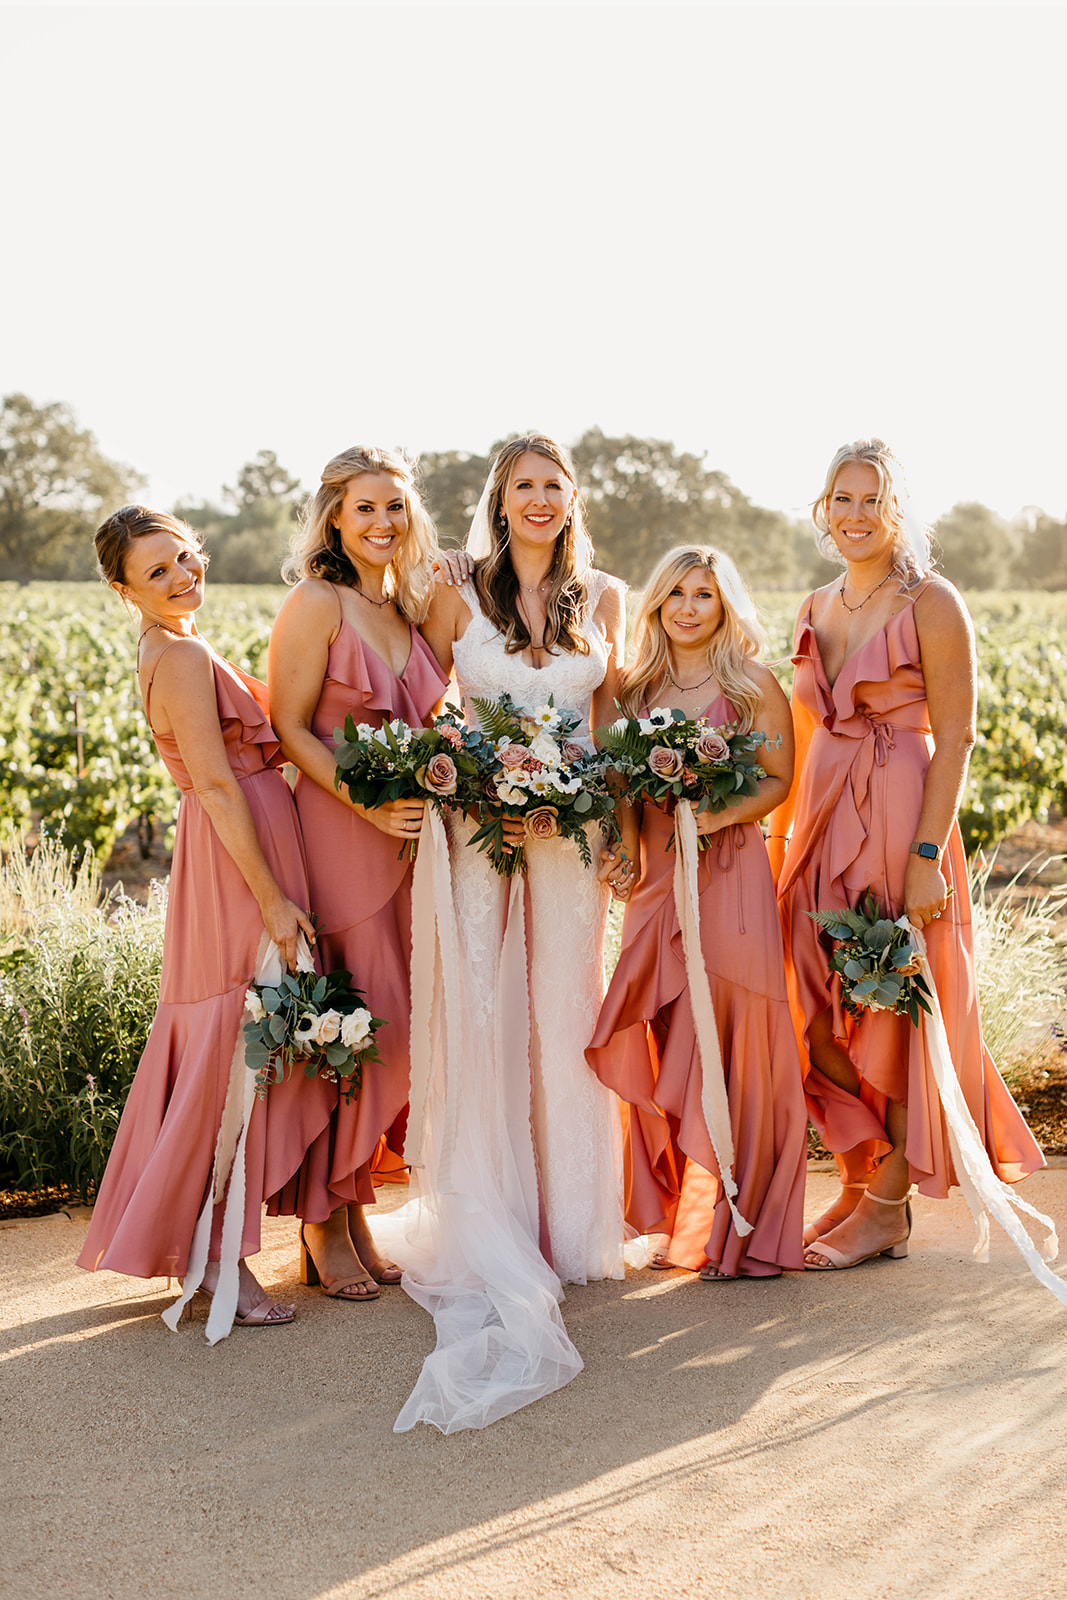 bride in lace wedding dress with bridesmaids in sunset pink satin dresses